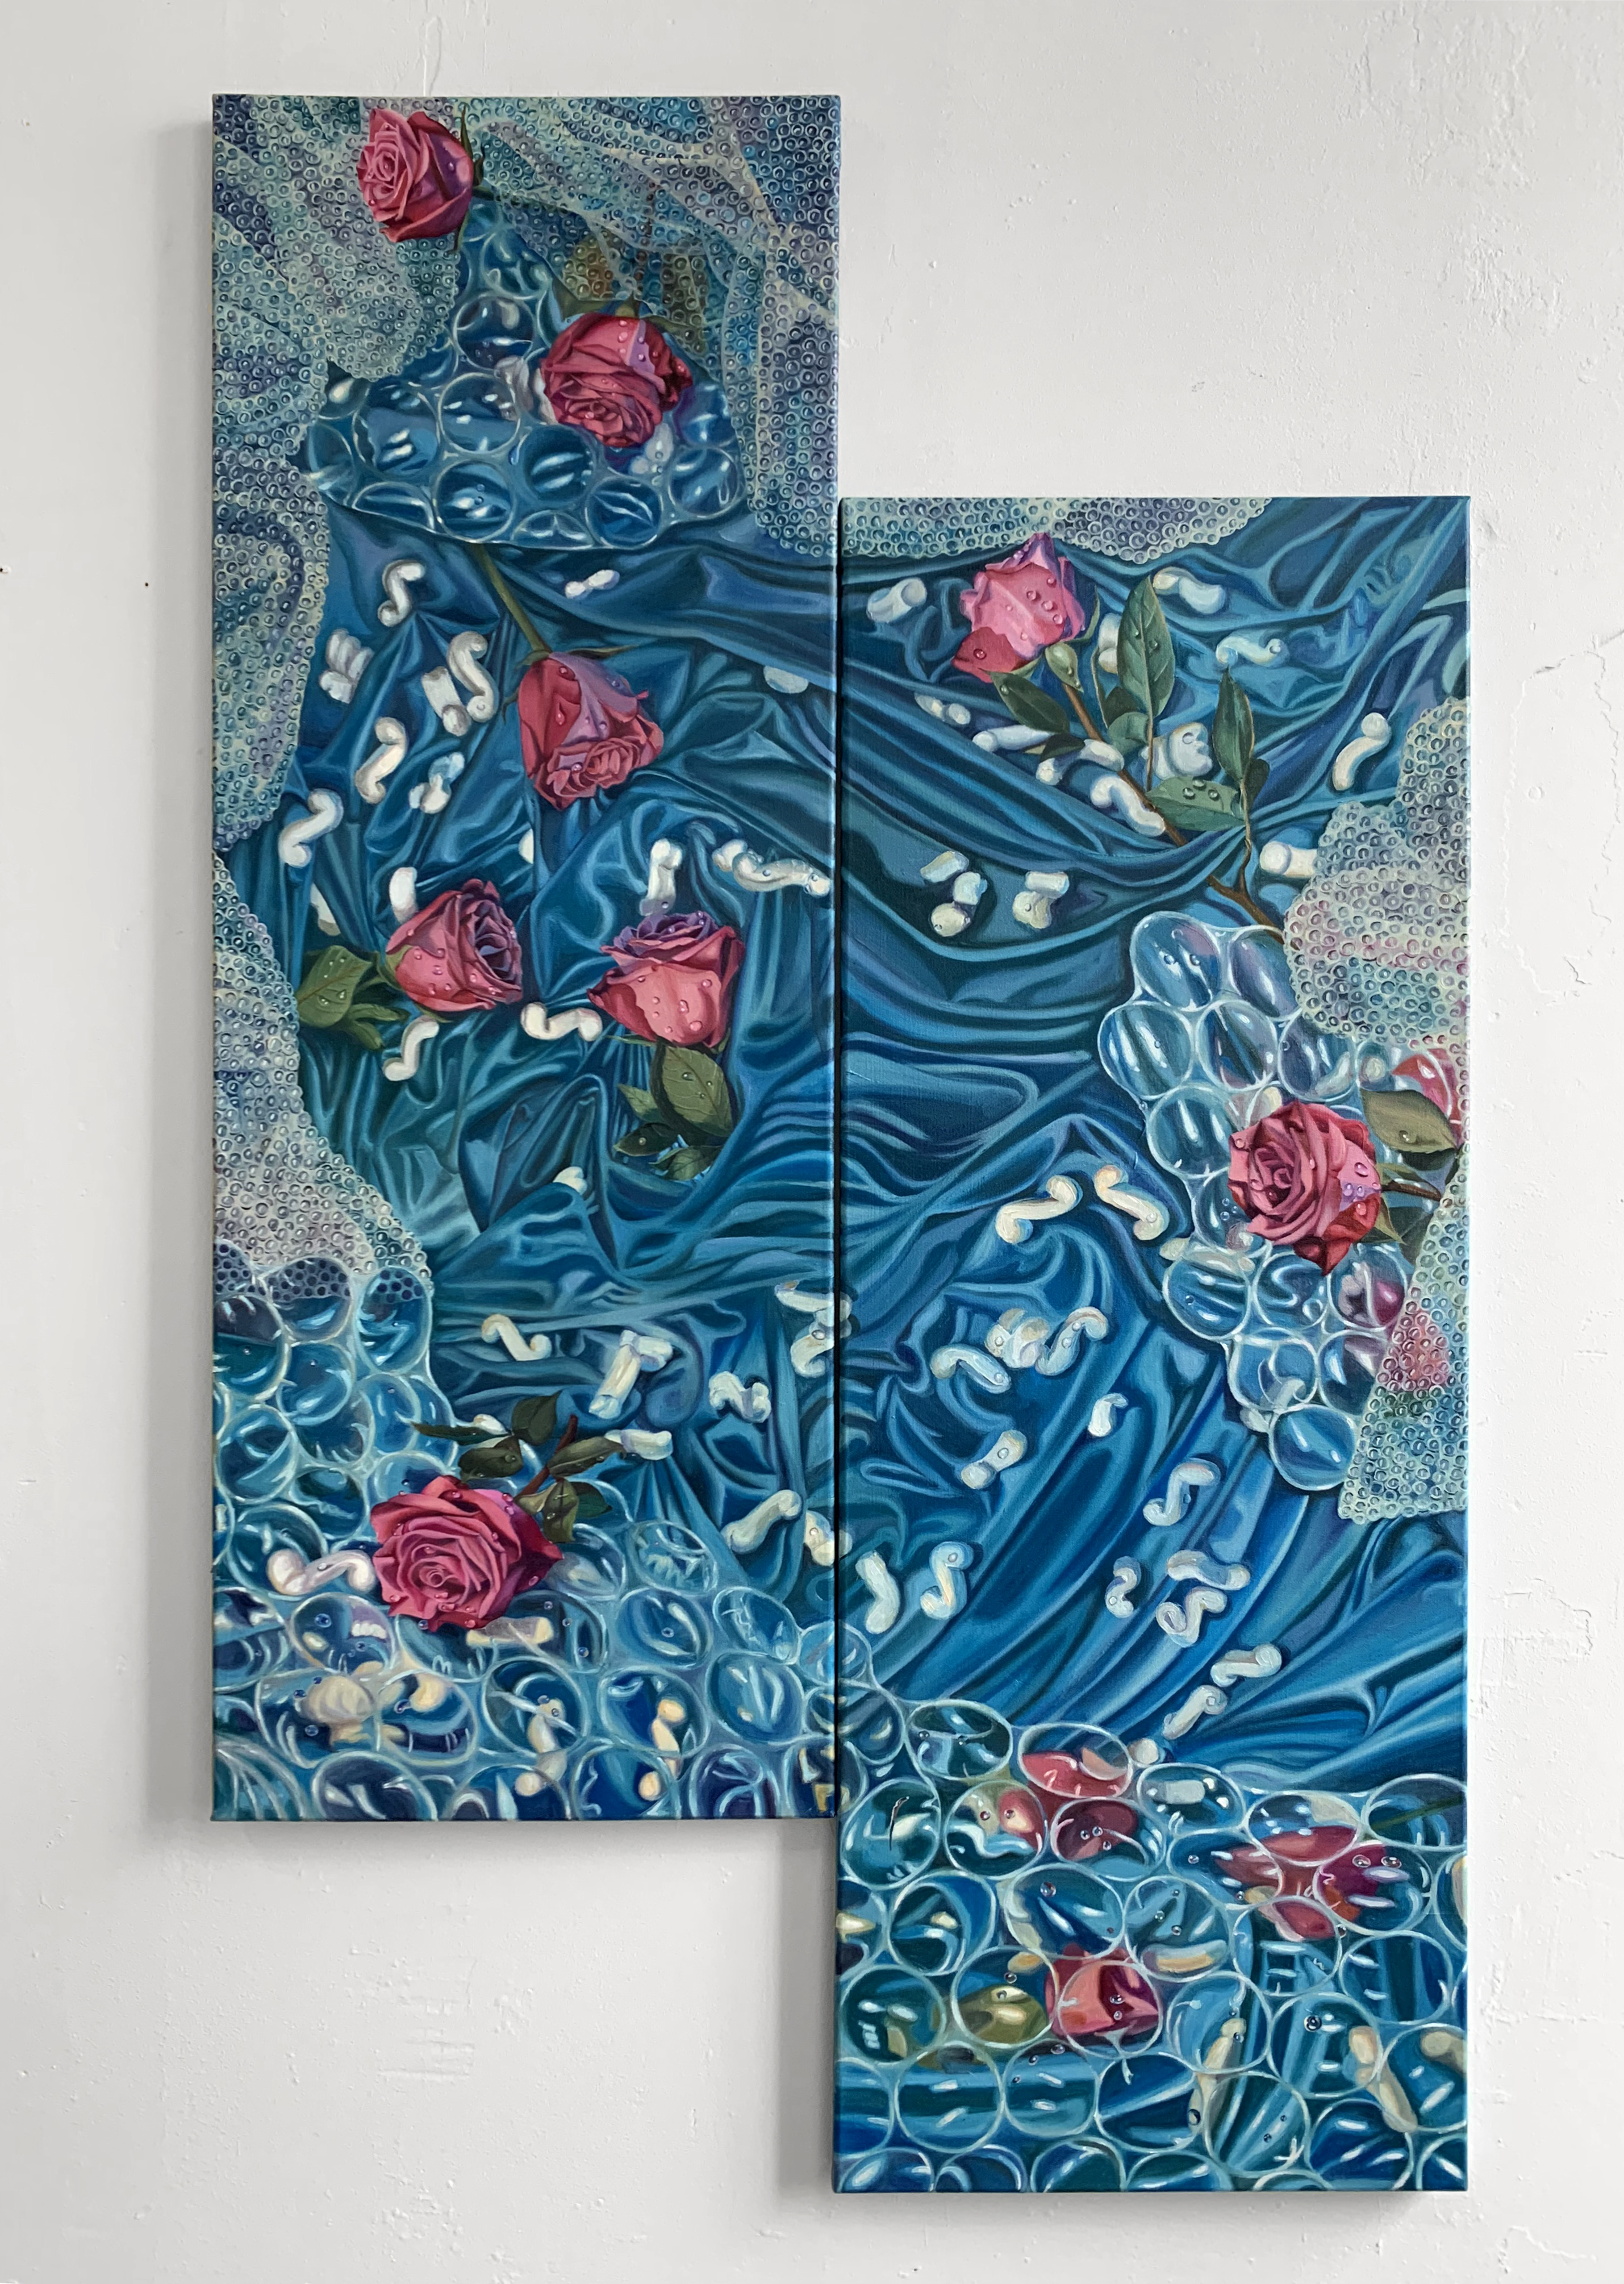 Heavy Surf (Diptych), 40x15 & 40x15 2021 <br>oil on canvas<br><br>I work in an art storage facility that protects giant, priceless art. Twice a week we fill two construction dumpsters with discarded packaging materials like bubble wrap and peanuts. As plastic takes an average of 450 - 1,000 years to decompose, I postulate that the destruction of the environment to preserve fine art is like the antinomy of war: “the only justification of sacrifice is it’s utility; but the useful is what serves Man. Thus, in order to serve some men we must do disservice to others. By what principle are we to choose between them?” (De Beauvoir, S. (1948). The Positive Aspect of Ambiguity. In <i>The Ethics of Ambiguity</i> (p. 113). Citadel Press.)